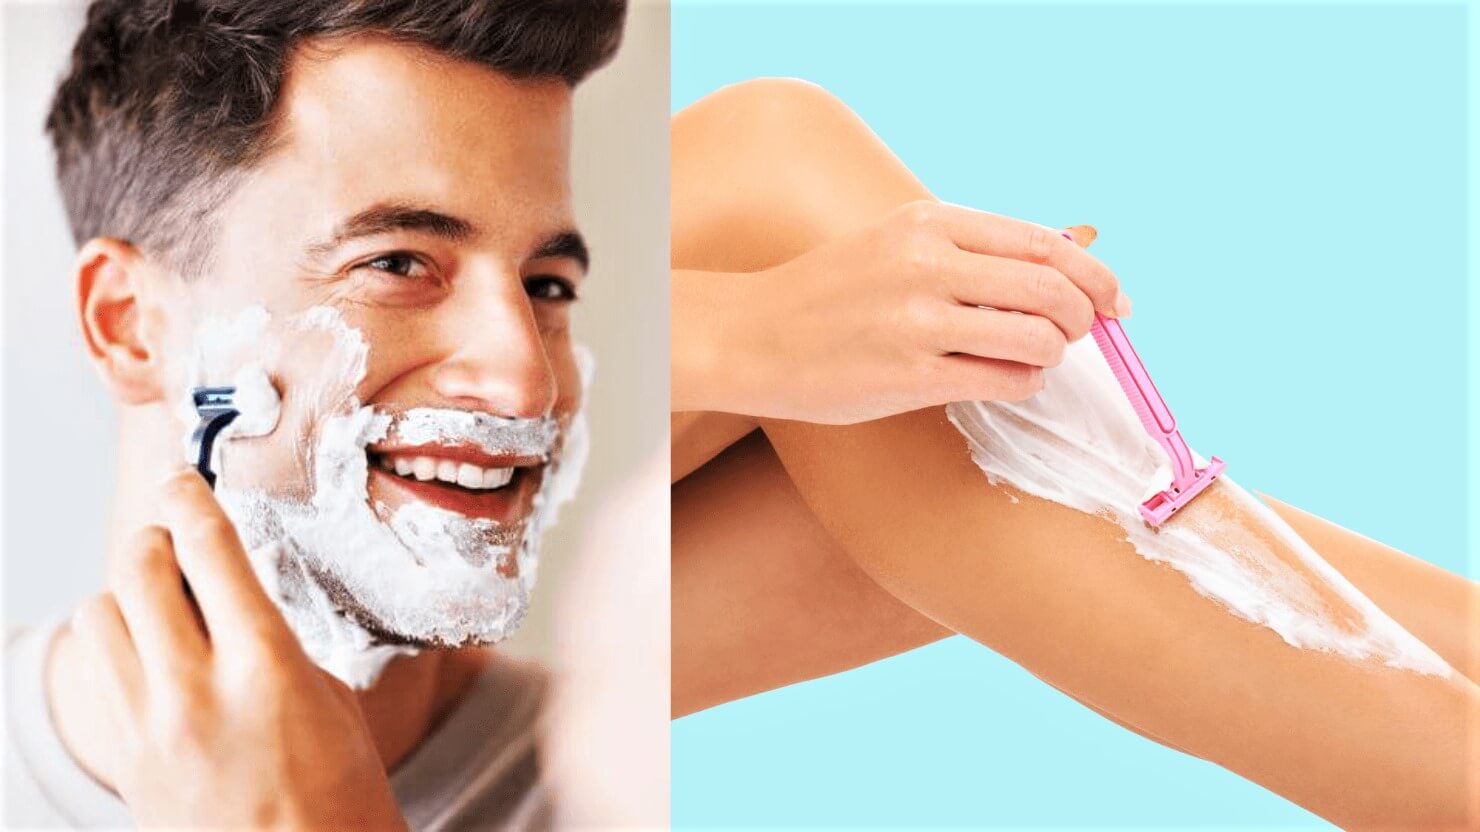 5 Tips on How to Avoid Razor Bumps and Ingrown Hair After